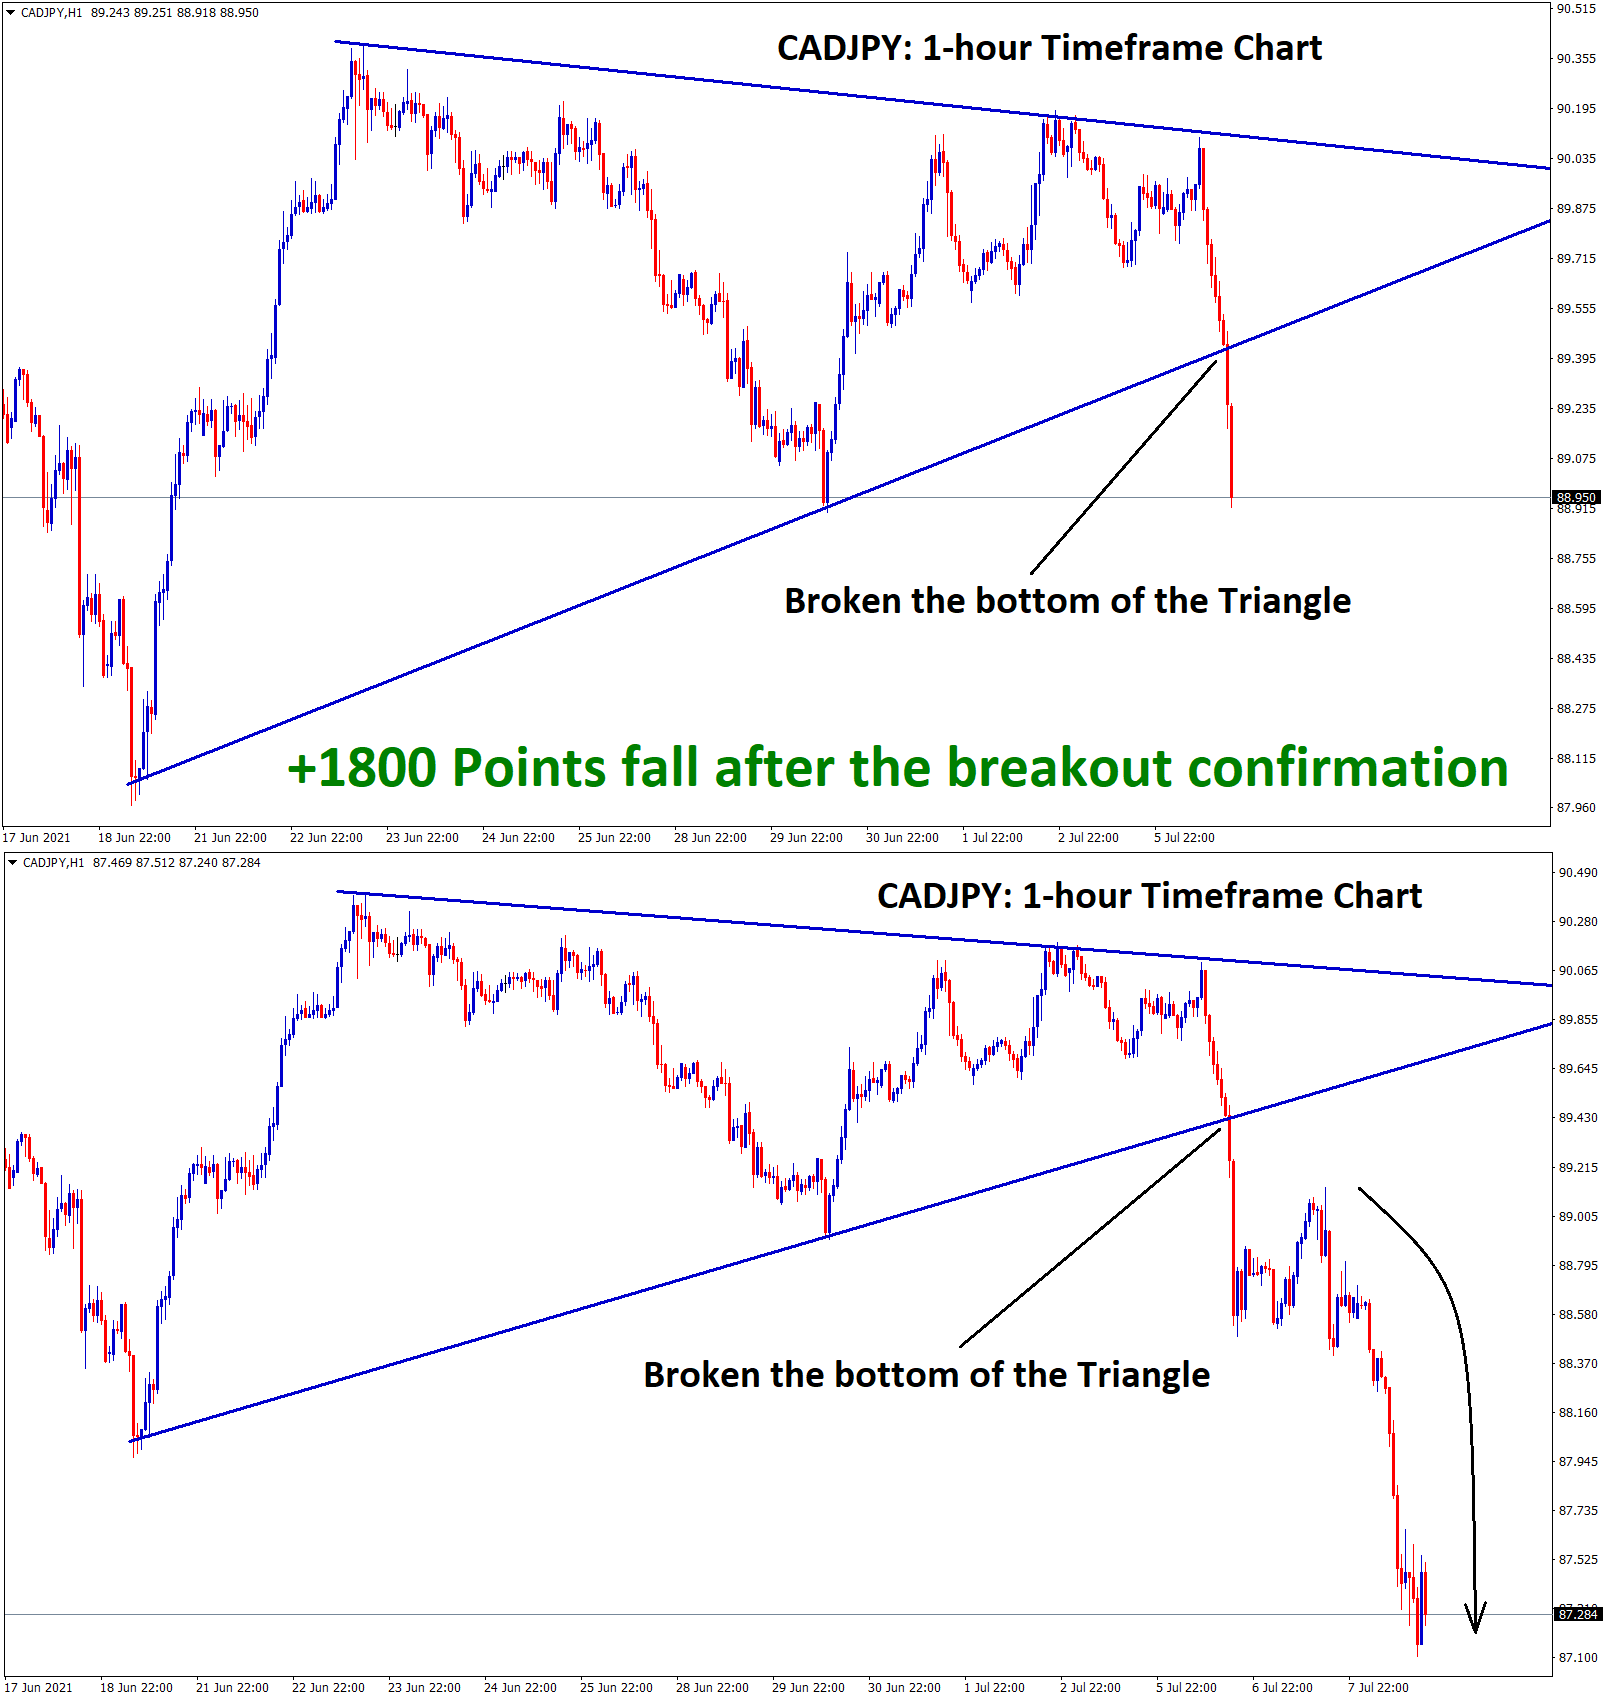 1800 Points fall after the breakout confirmation of triangle pattern in cadjpy